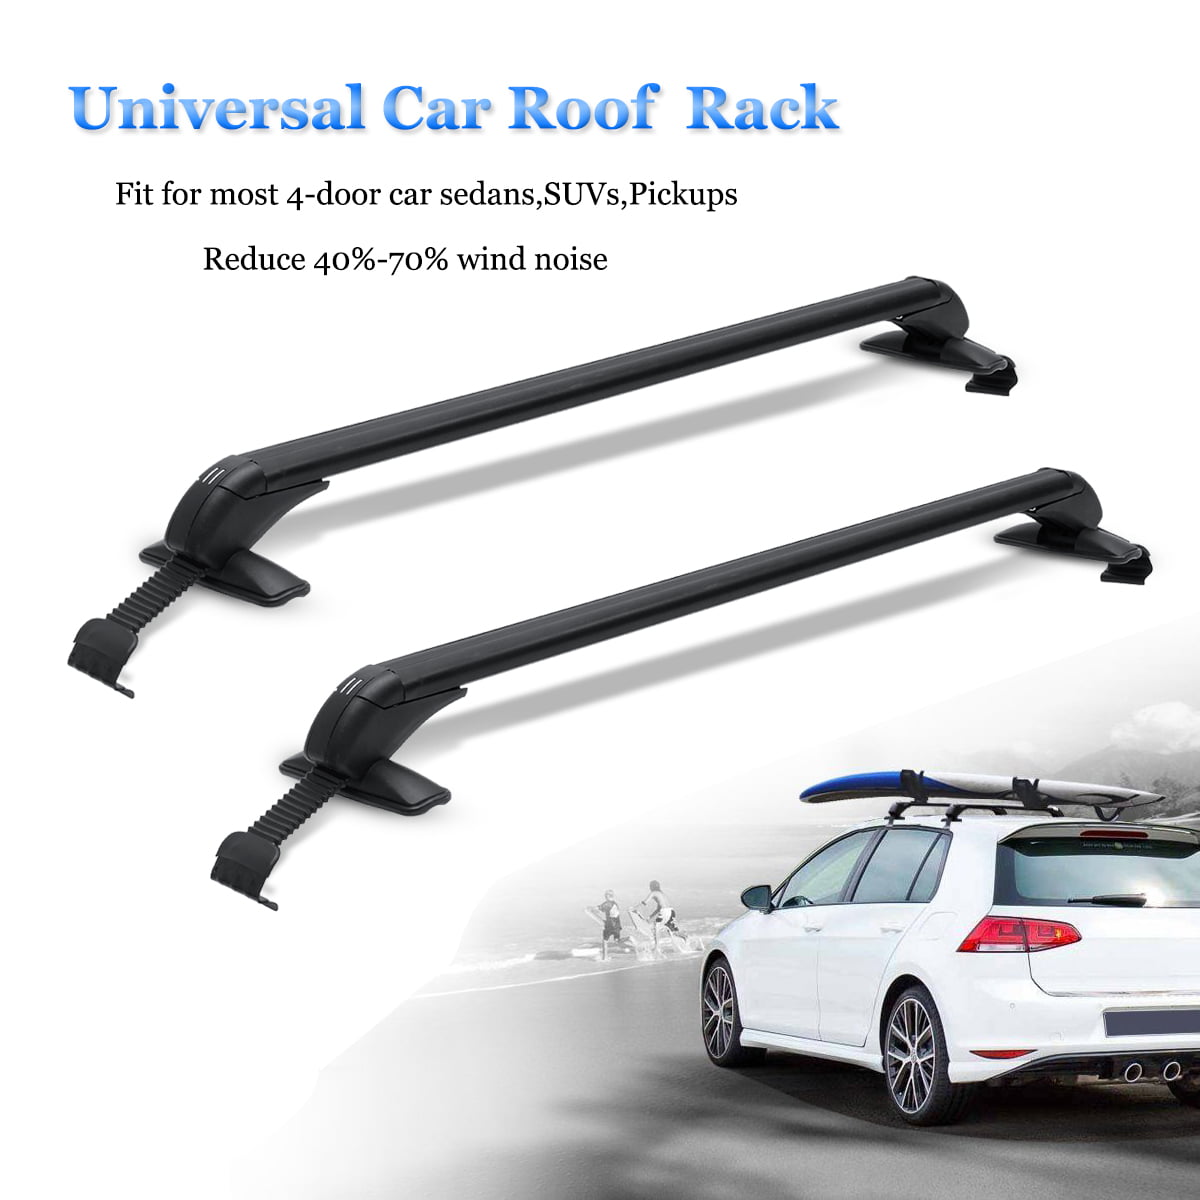 Naked Roof YHAAVALE 53 Adjustable Luggage Cross Bars,Universal Roof Rack Cross Bars Keyed Locking Fit for Car Without Roof Side Rail 